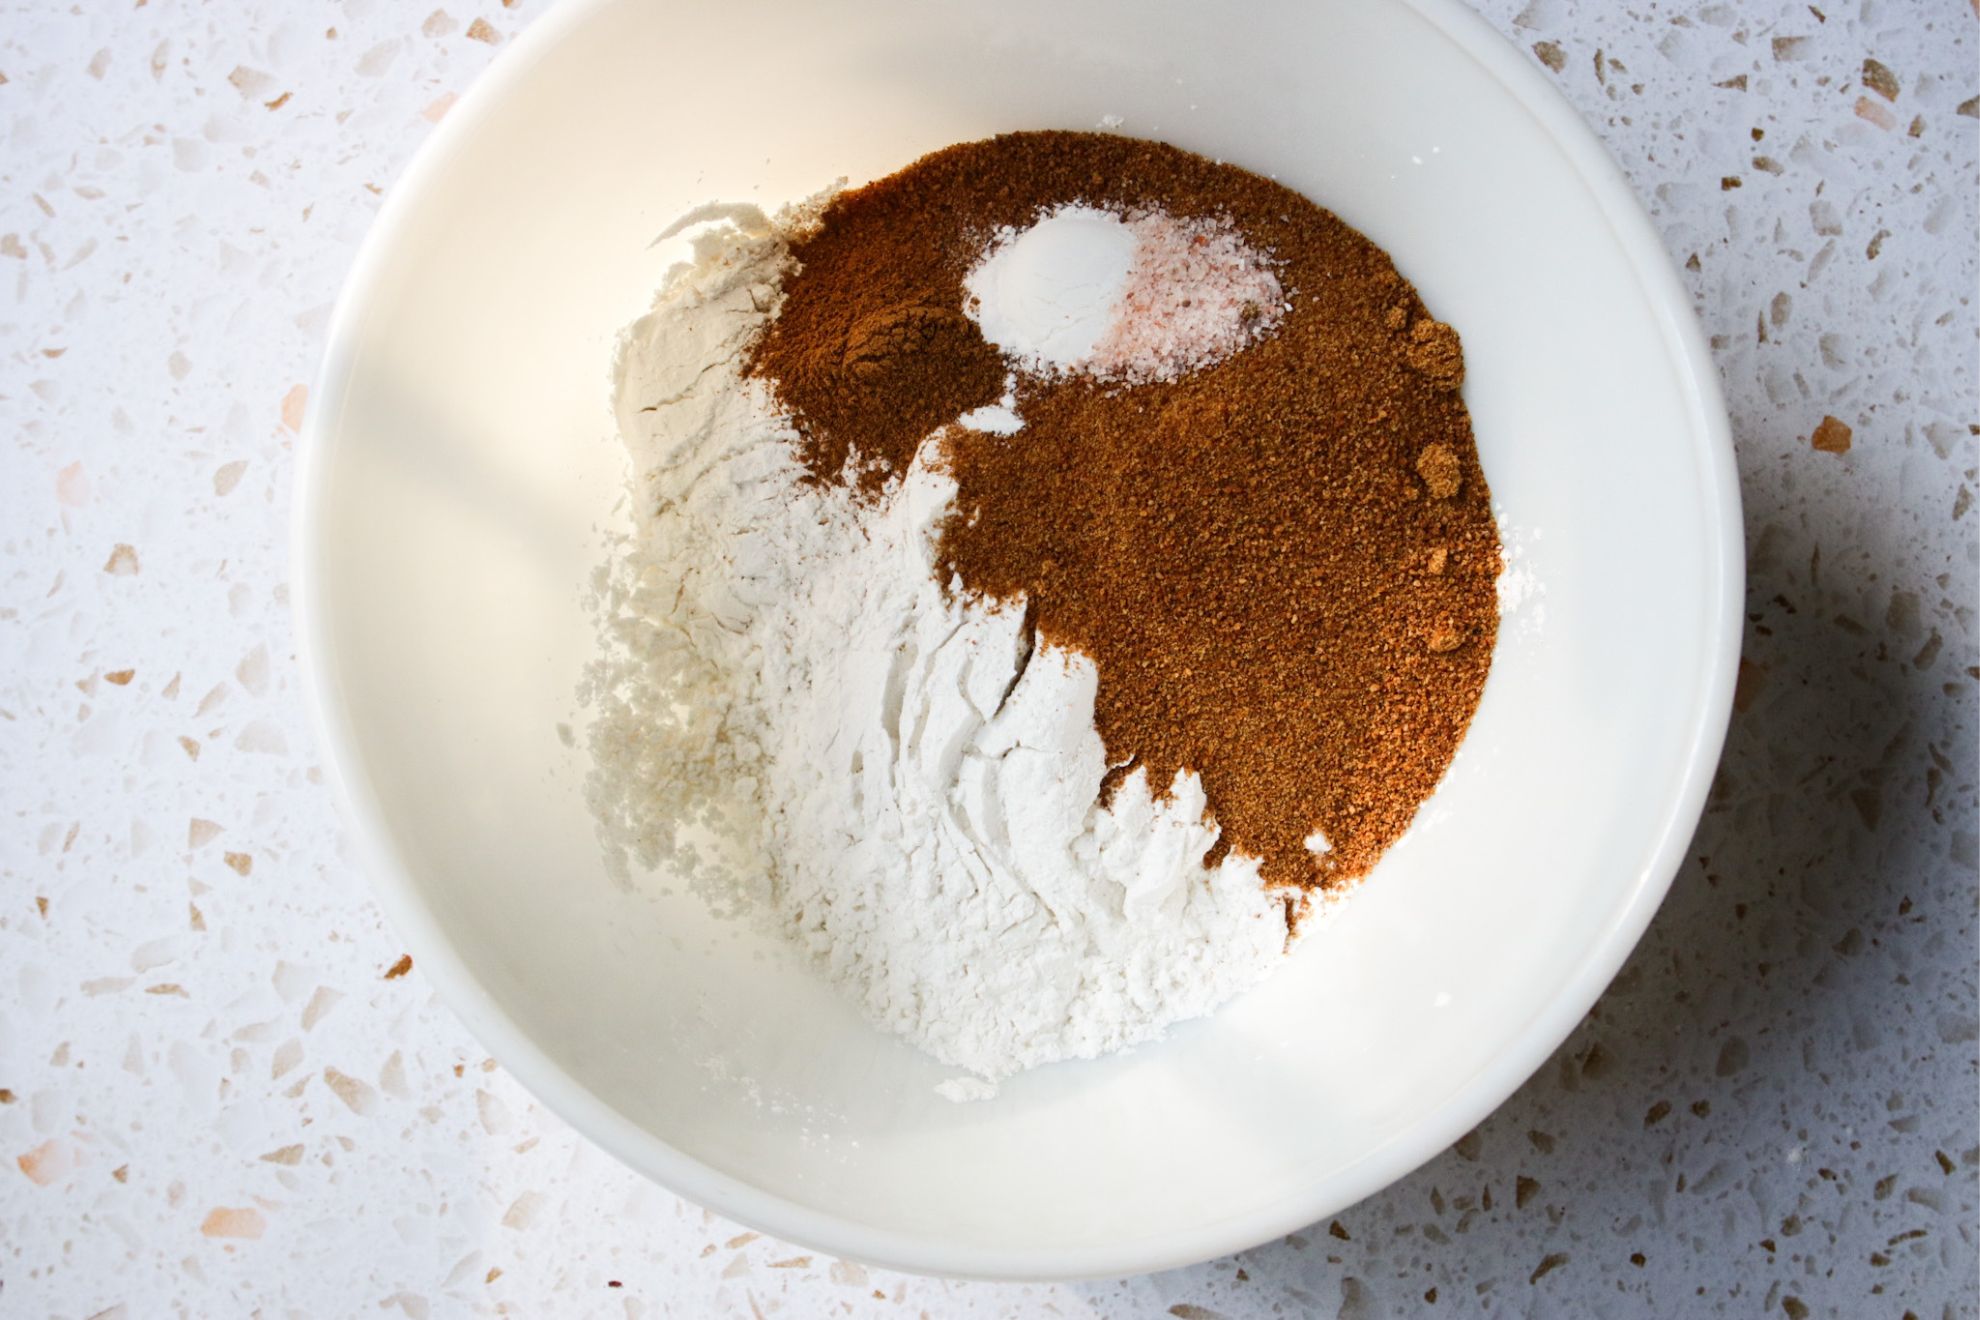 This is a horizontal overhead image of a large white glass bowl on a white and tan terrazzo surface. In the bowl is white flour, coconut sugar, baking powder, pumpkin spice and salt.